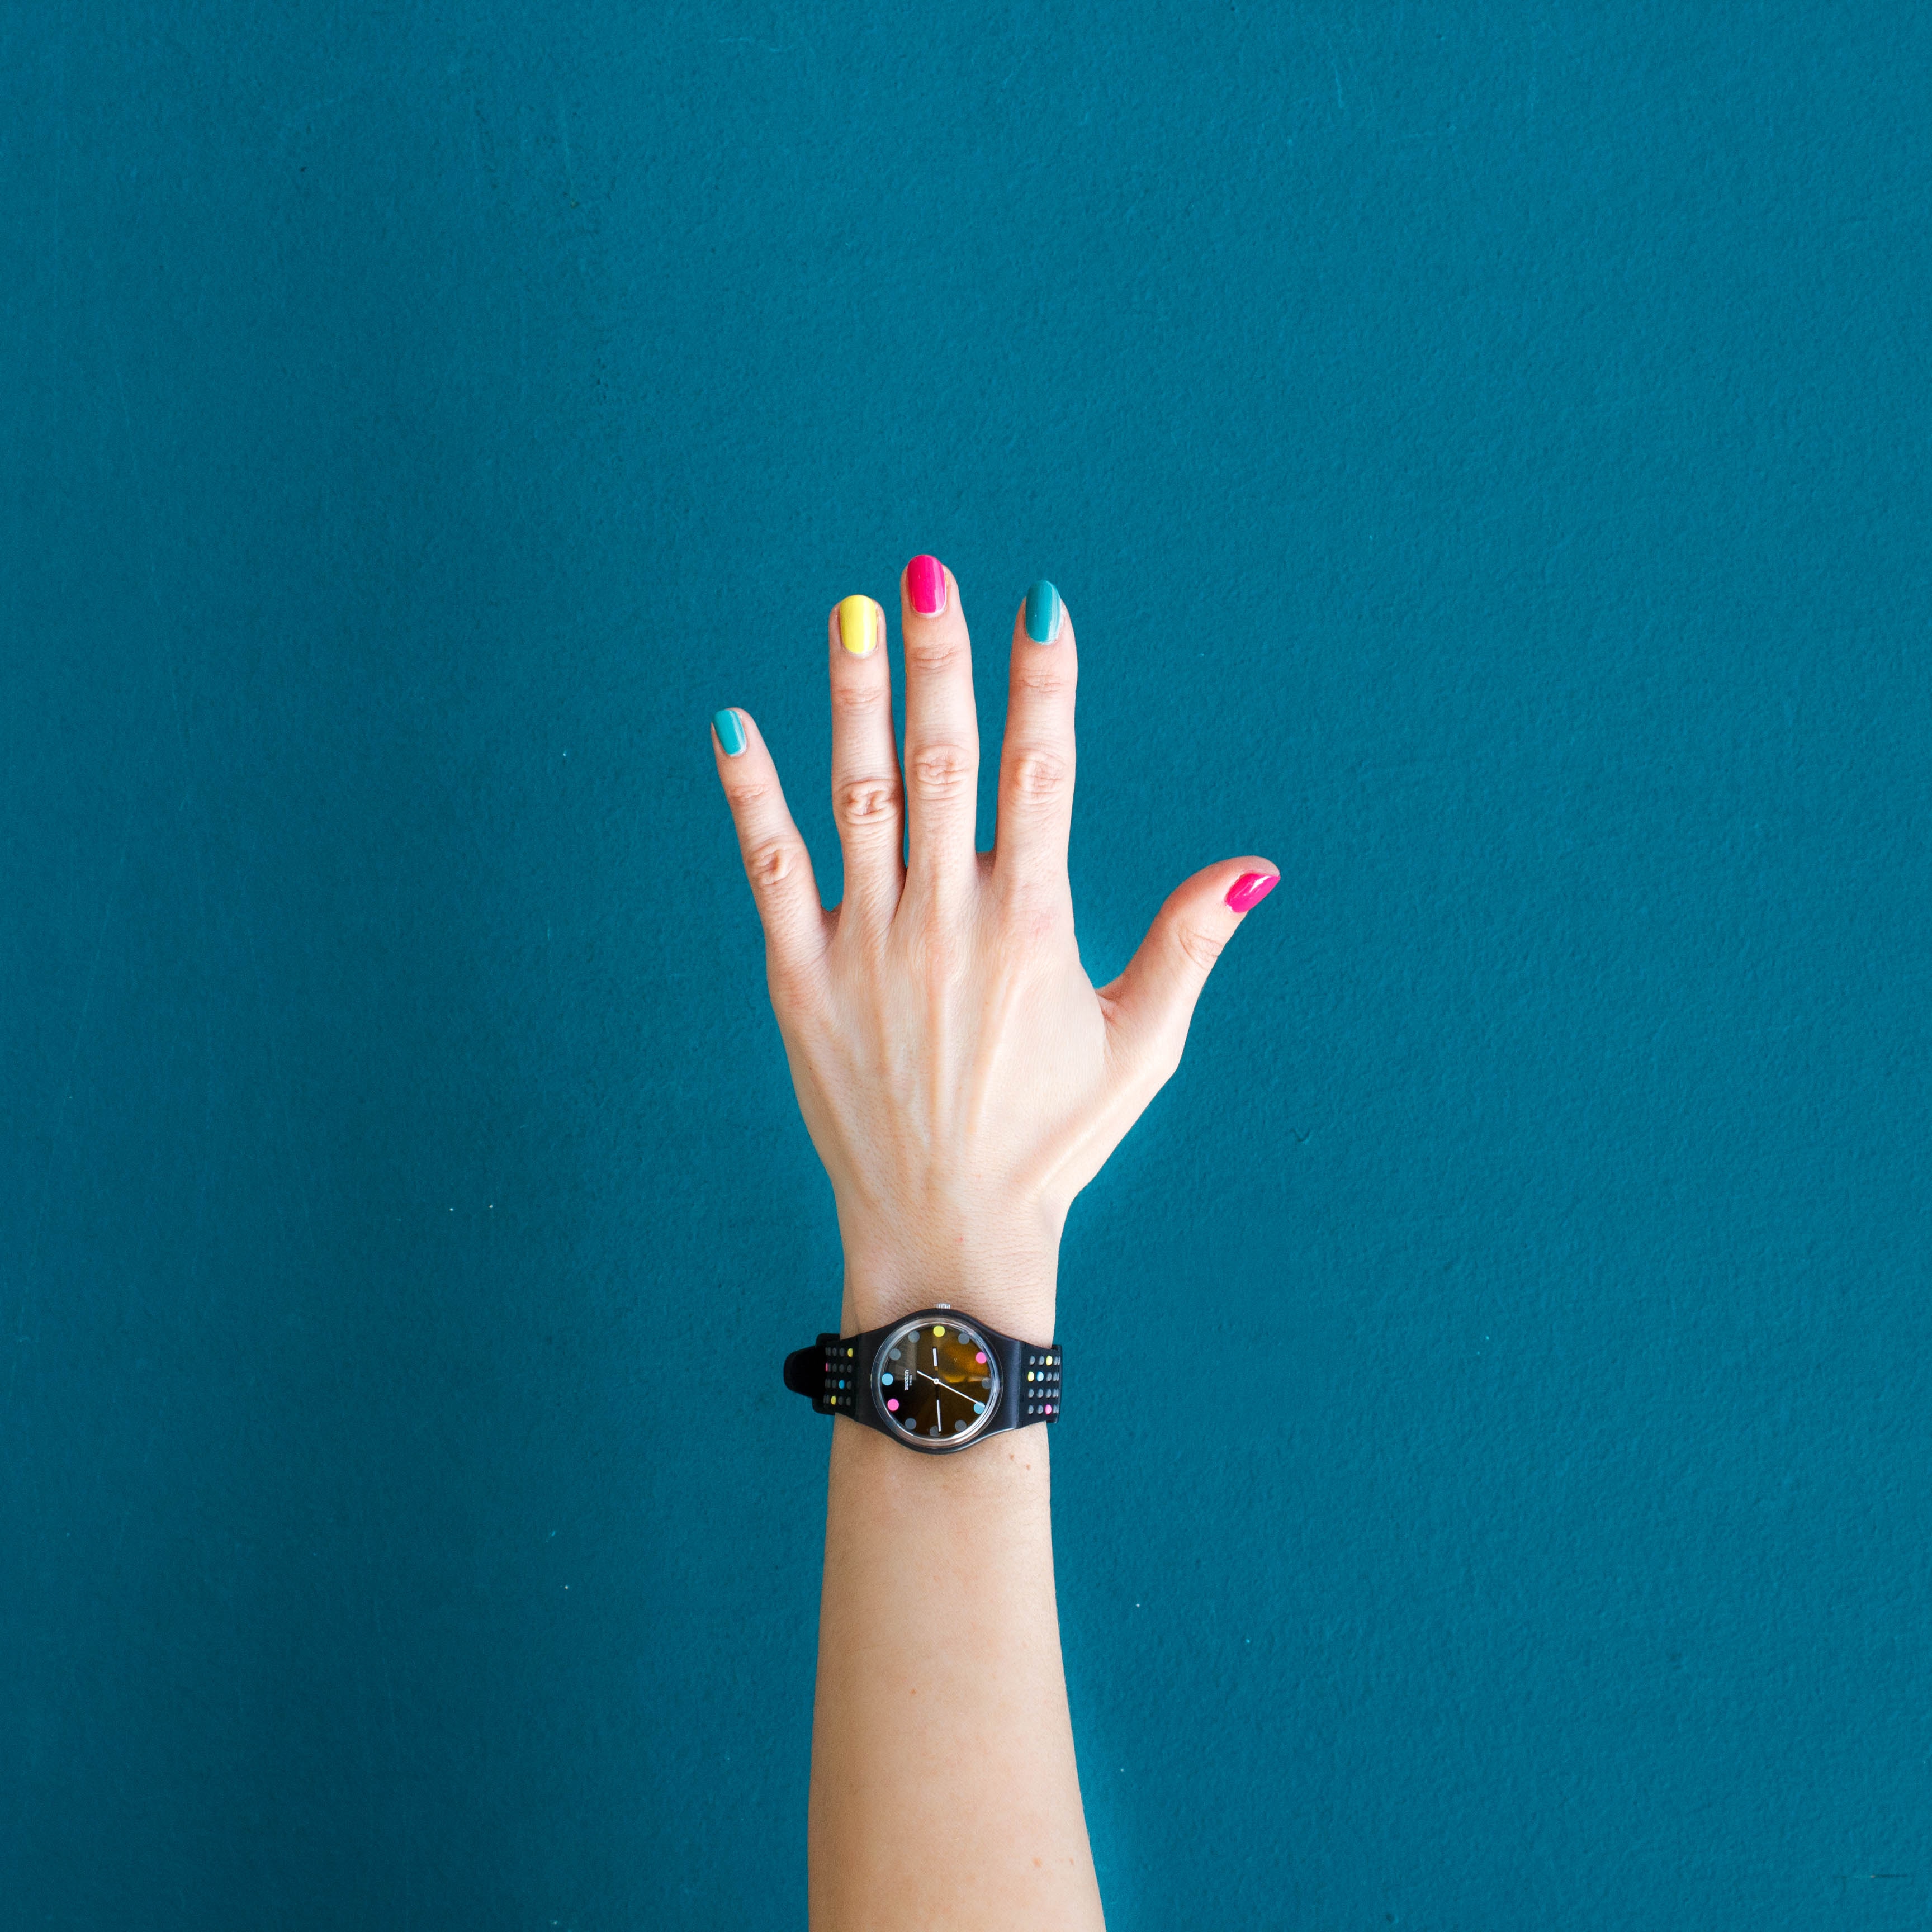 A hand raised in front of a blue background.  It is wearing a watch, and has colorfully painted nails.  